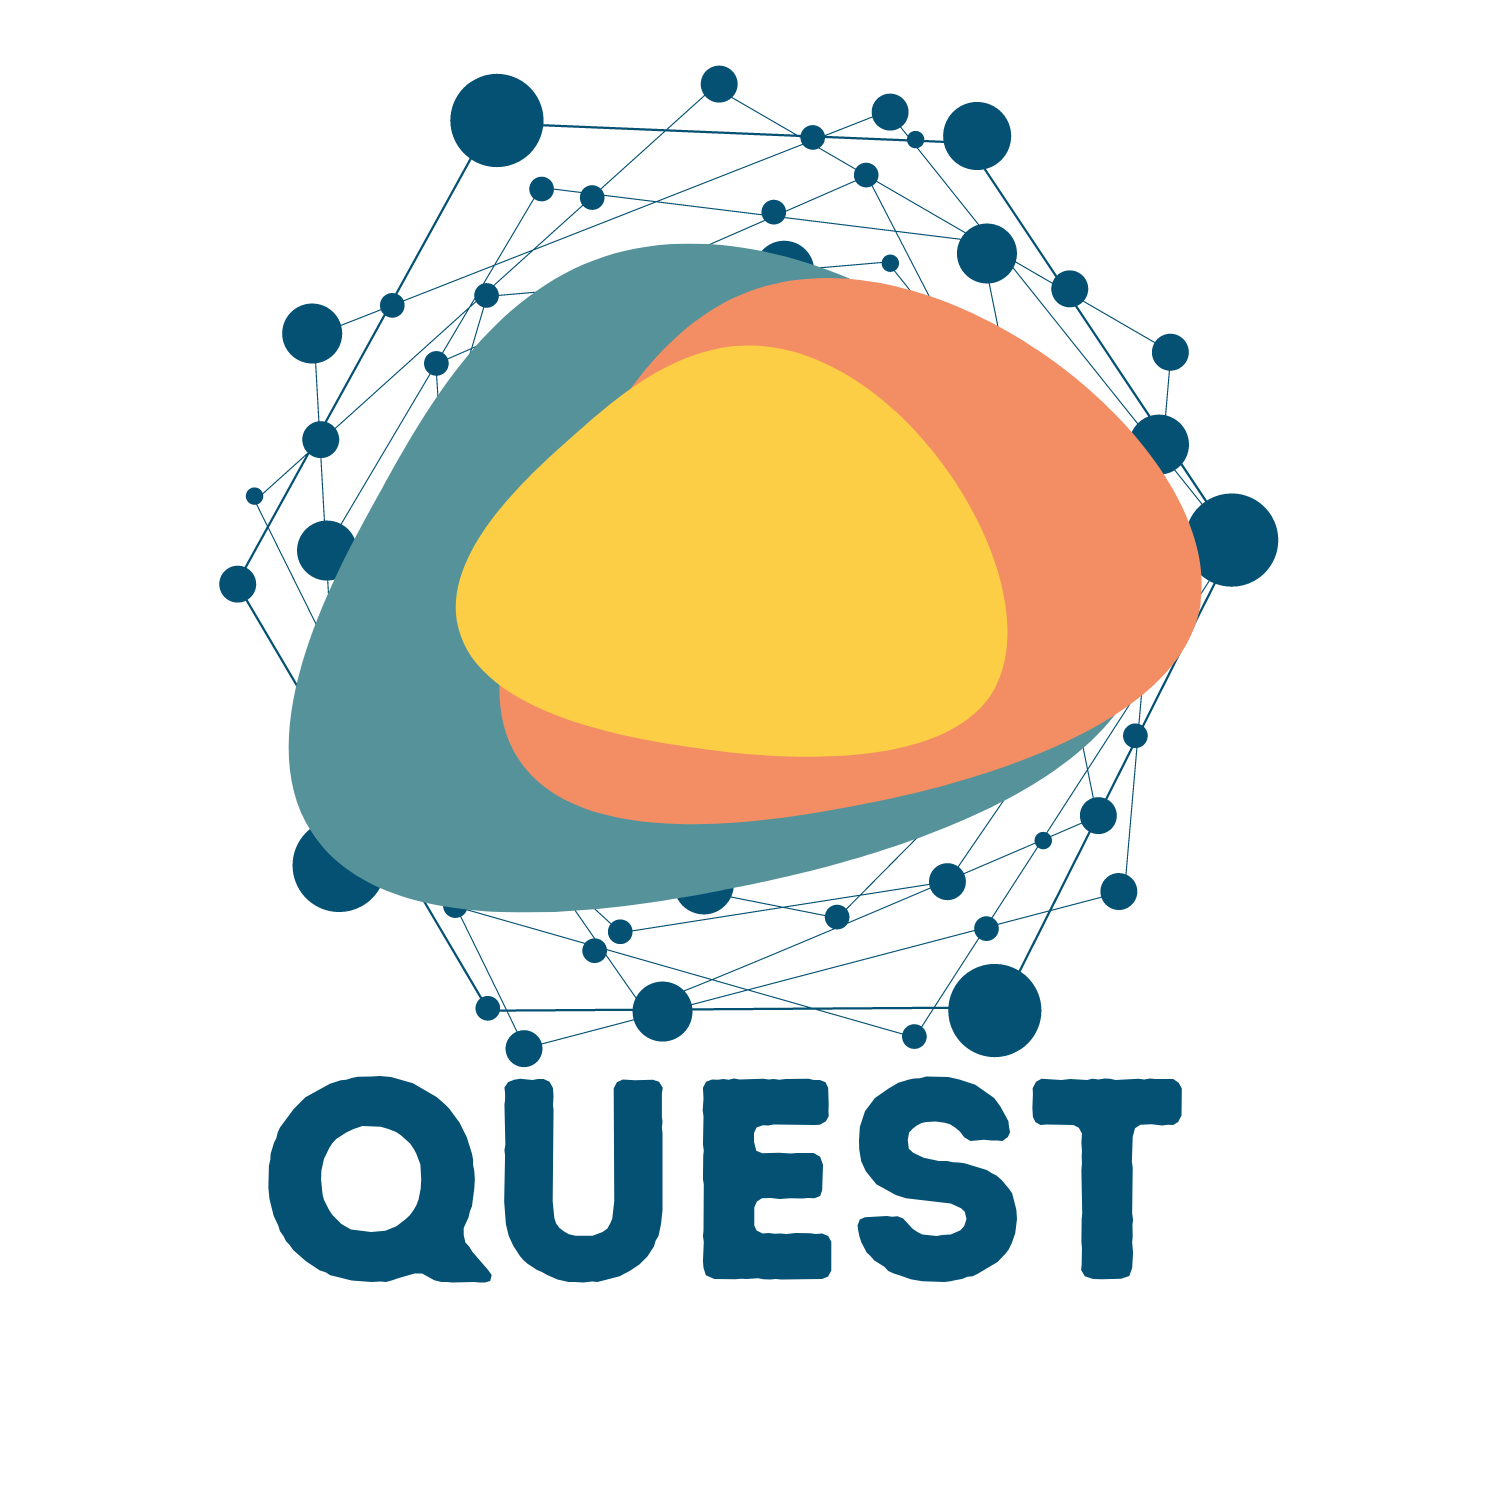 Quest (Quality Education for Sustainable Social Transformation)